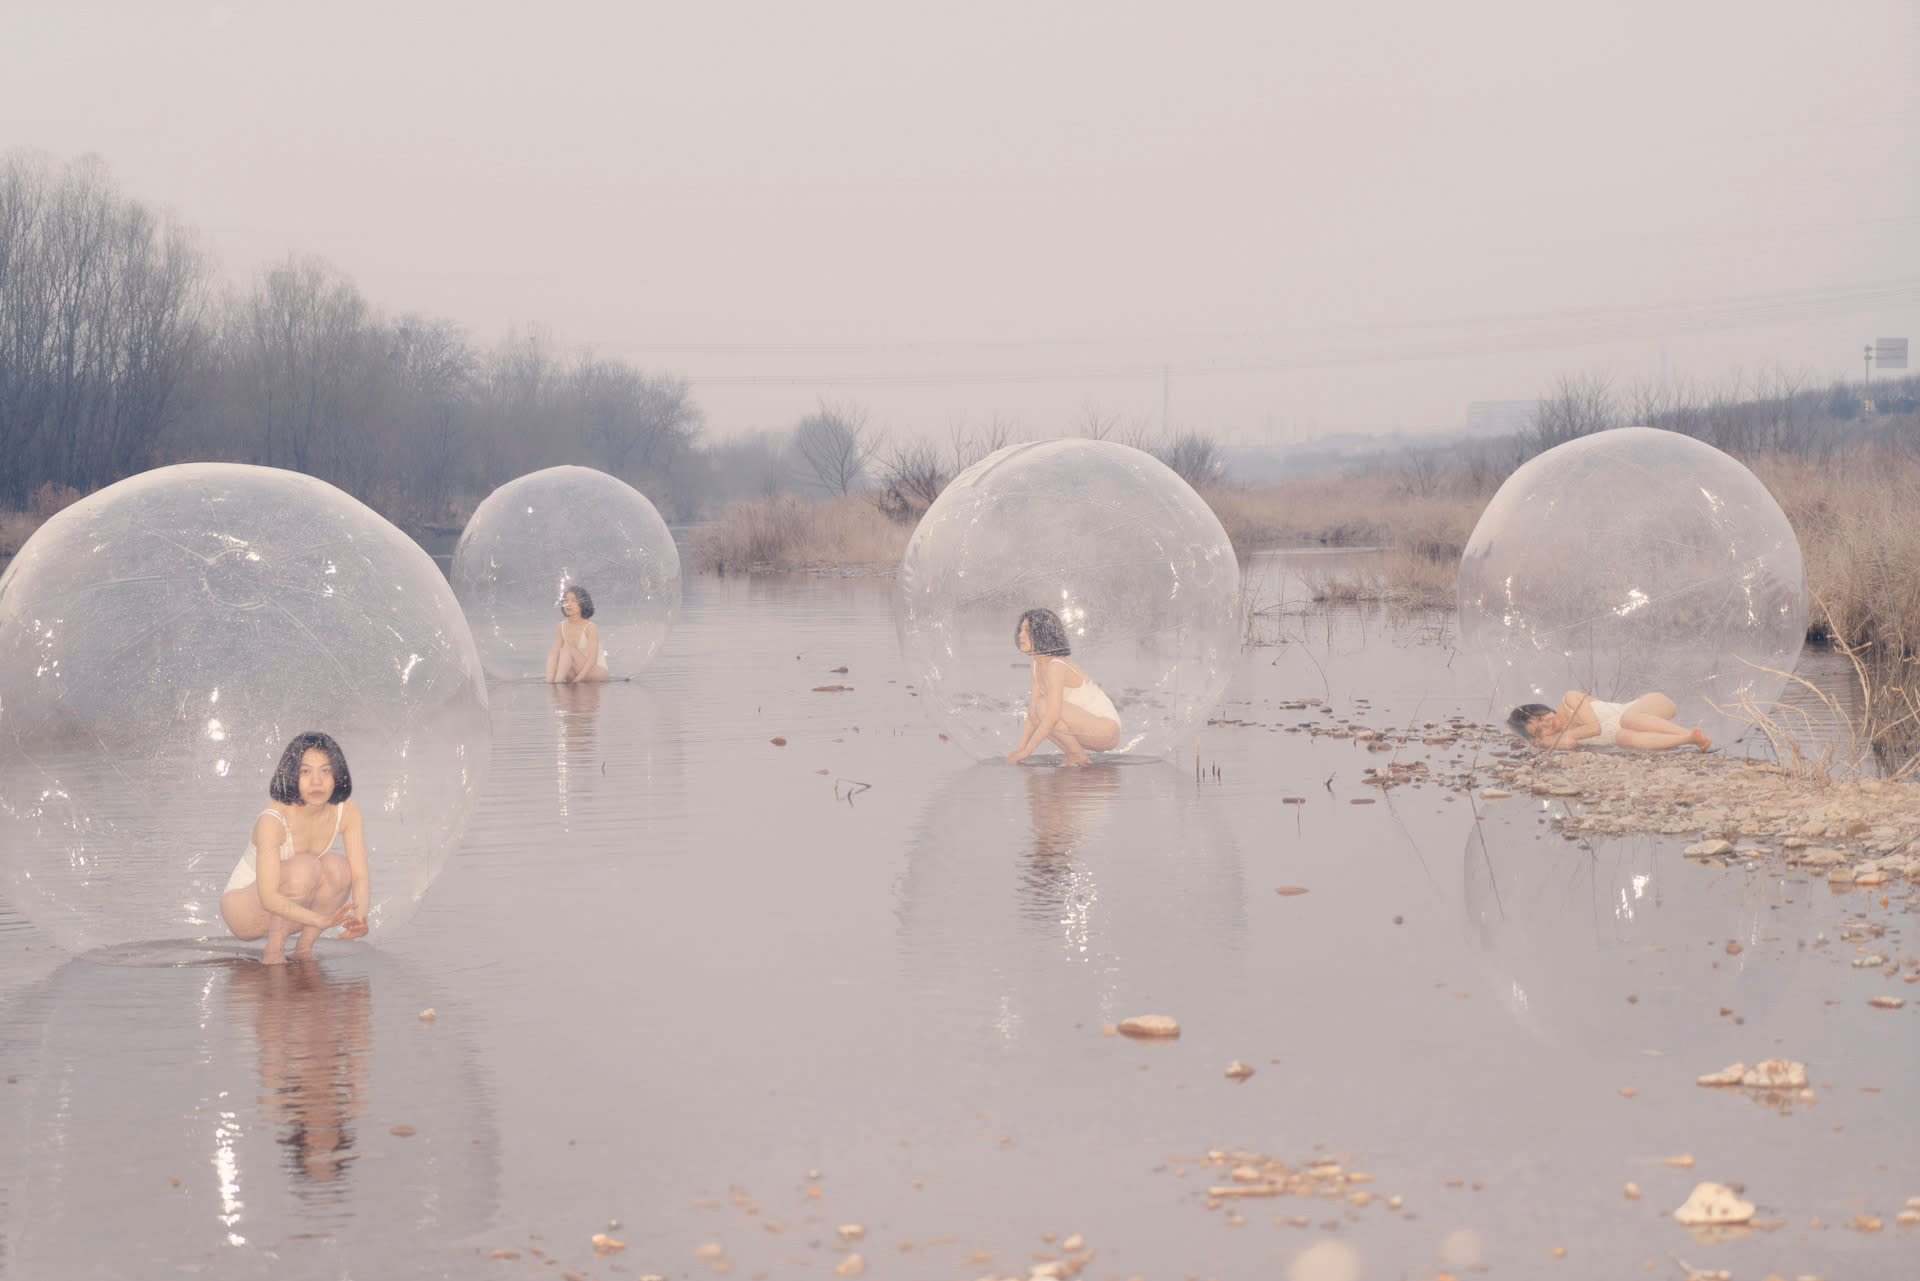 Image of four bubbles, containing a girl in different positions, floating on a river or lake.